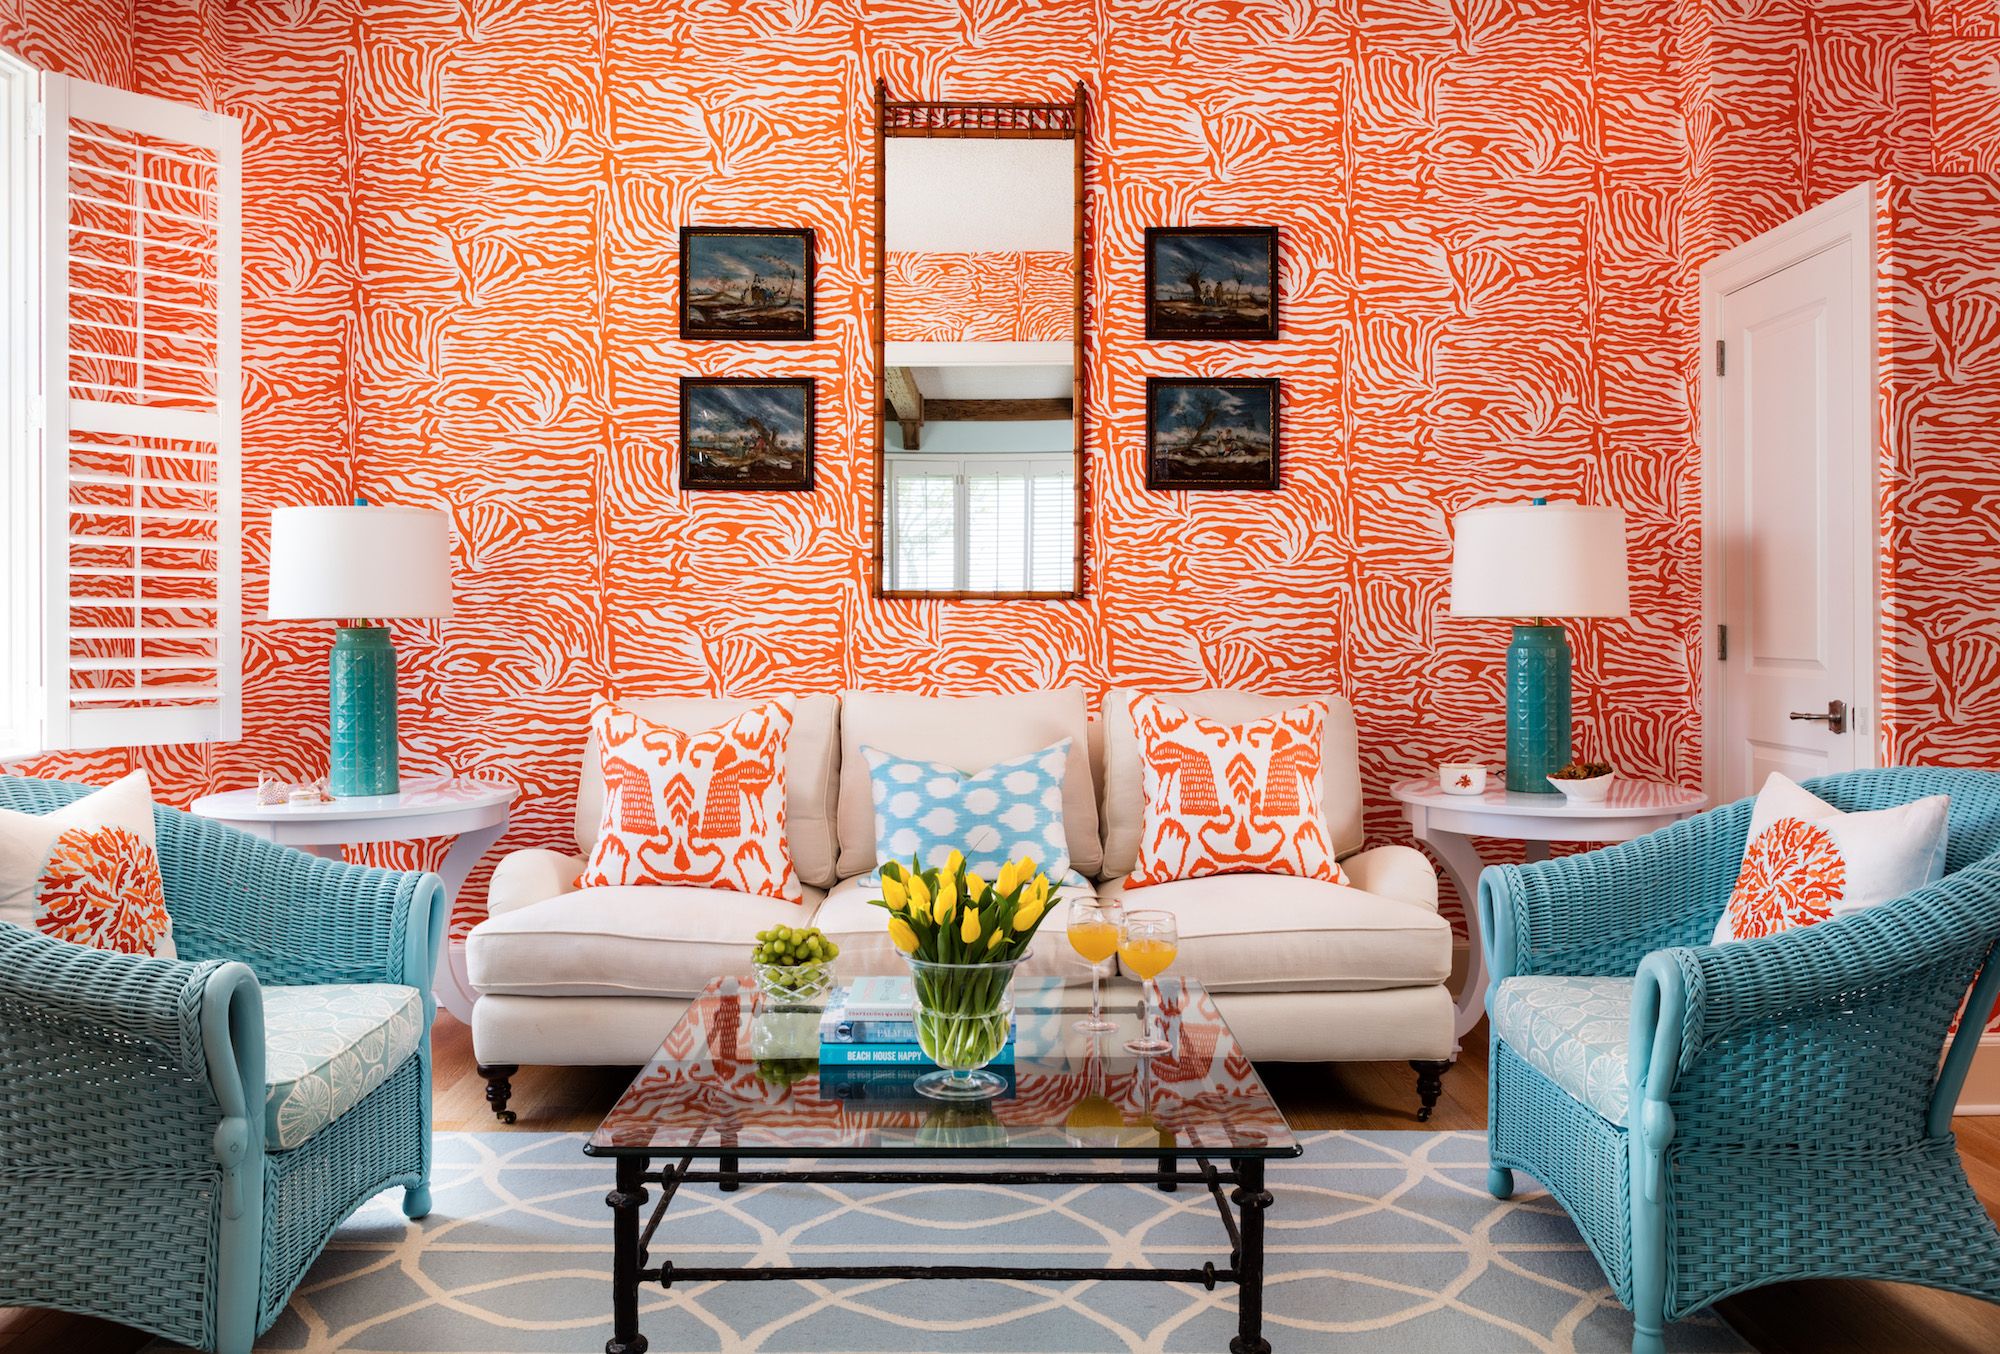 3 Living room wallpaper tips and ideas to use on your walls